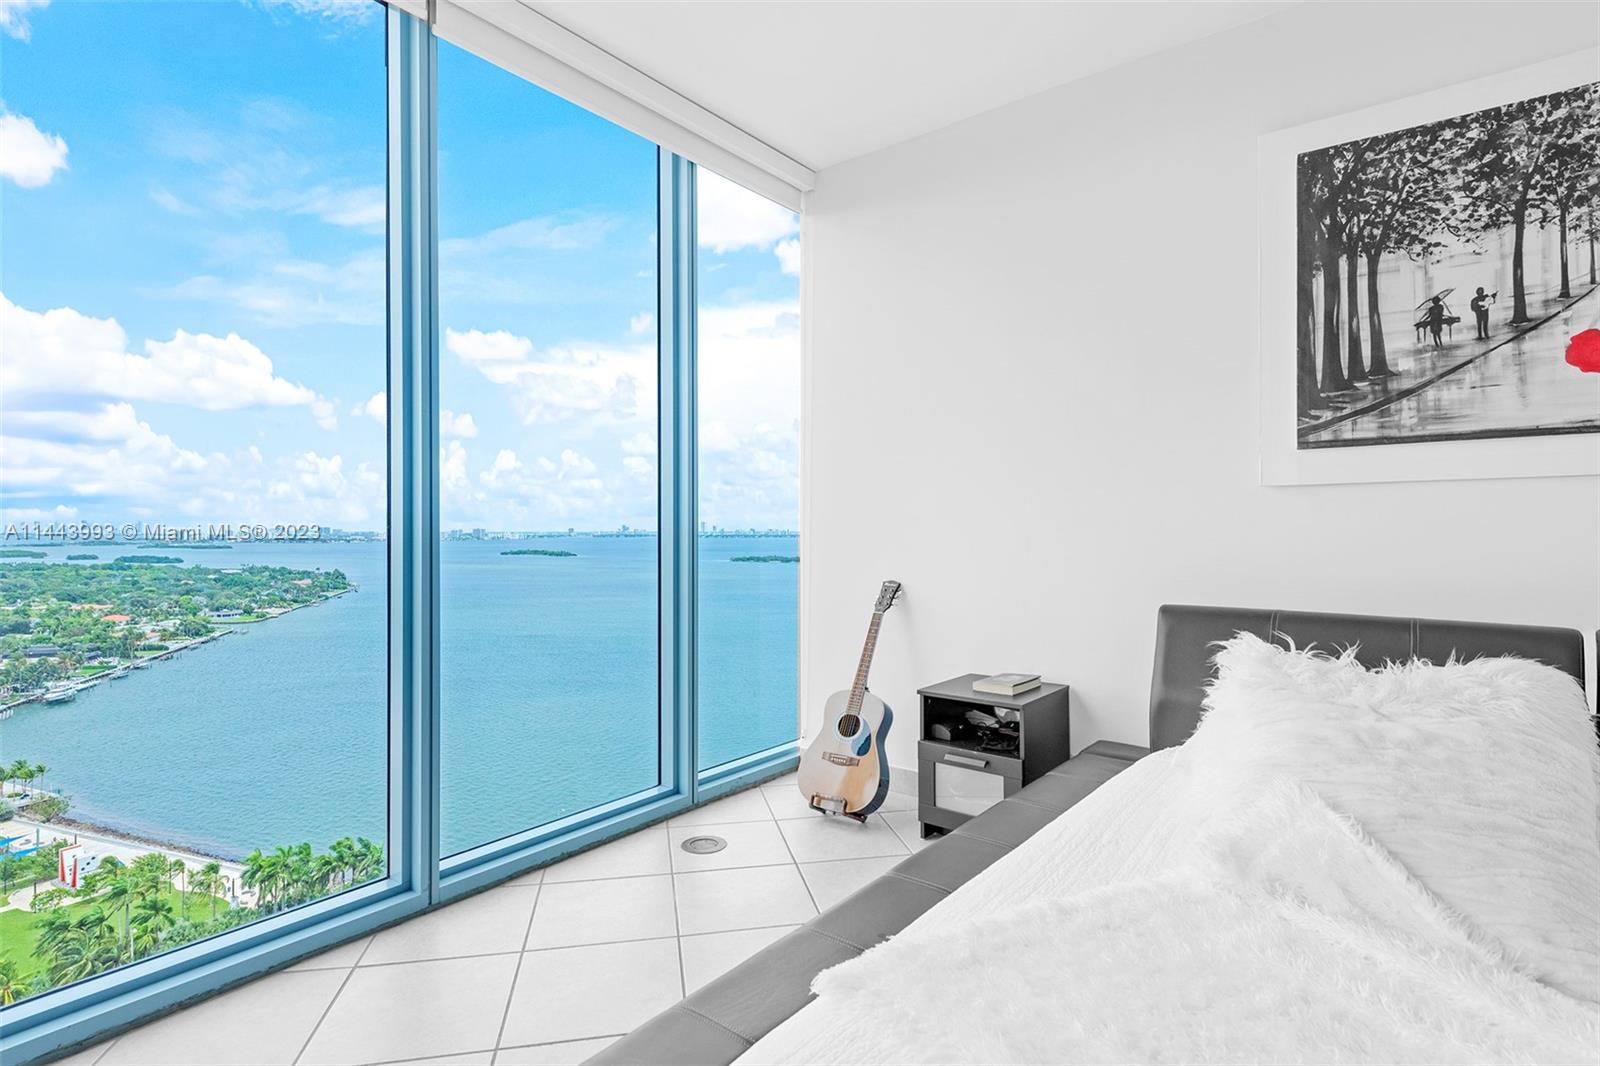 Photo 1 of Blue Apt 2206 in Miami - MLS A11443993